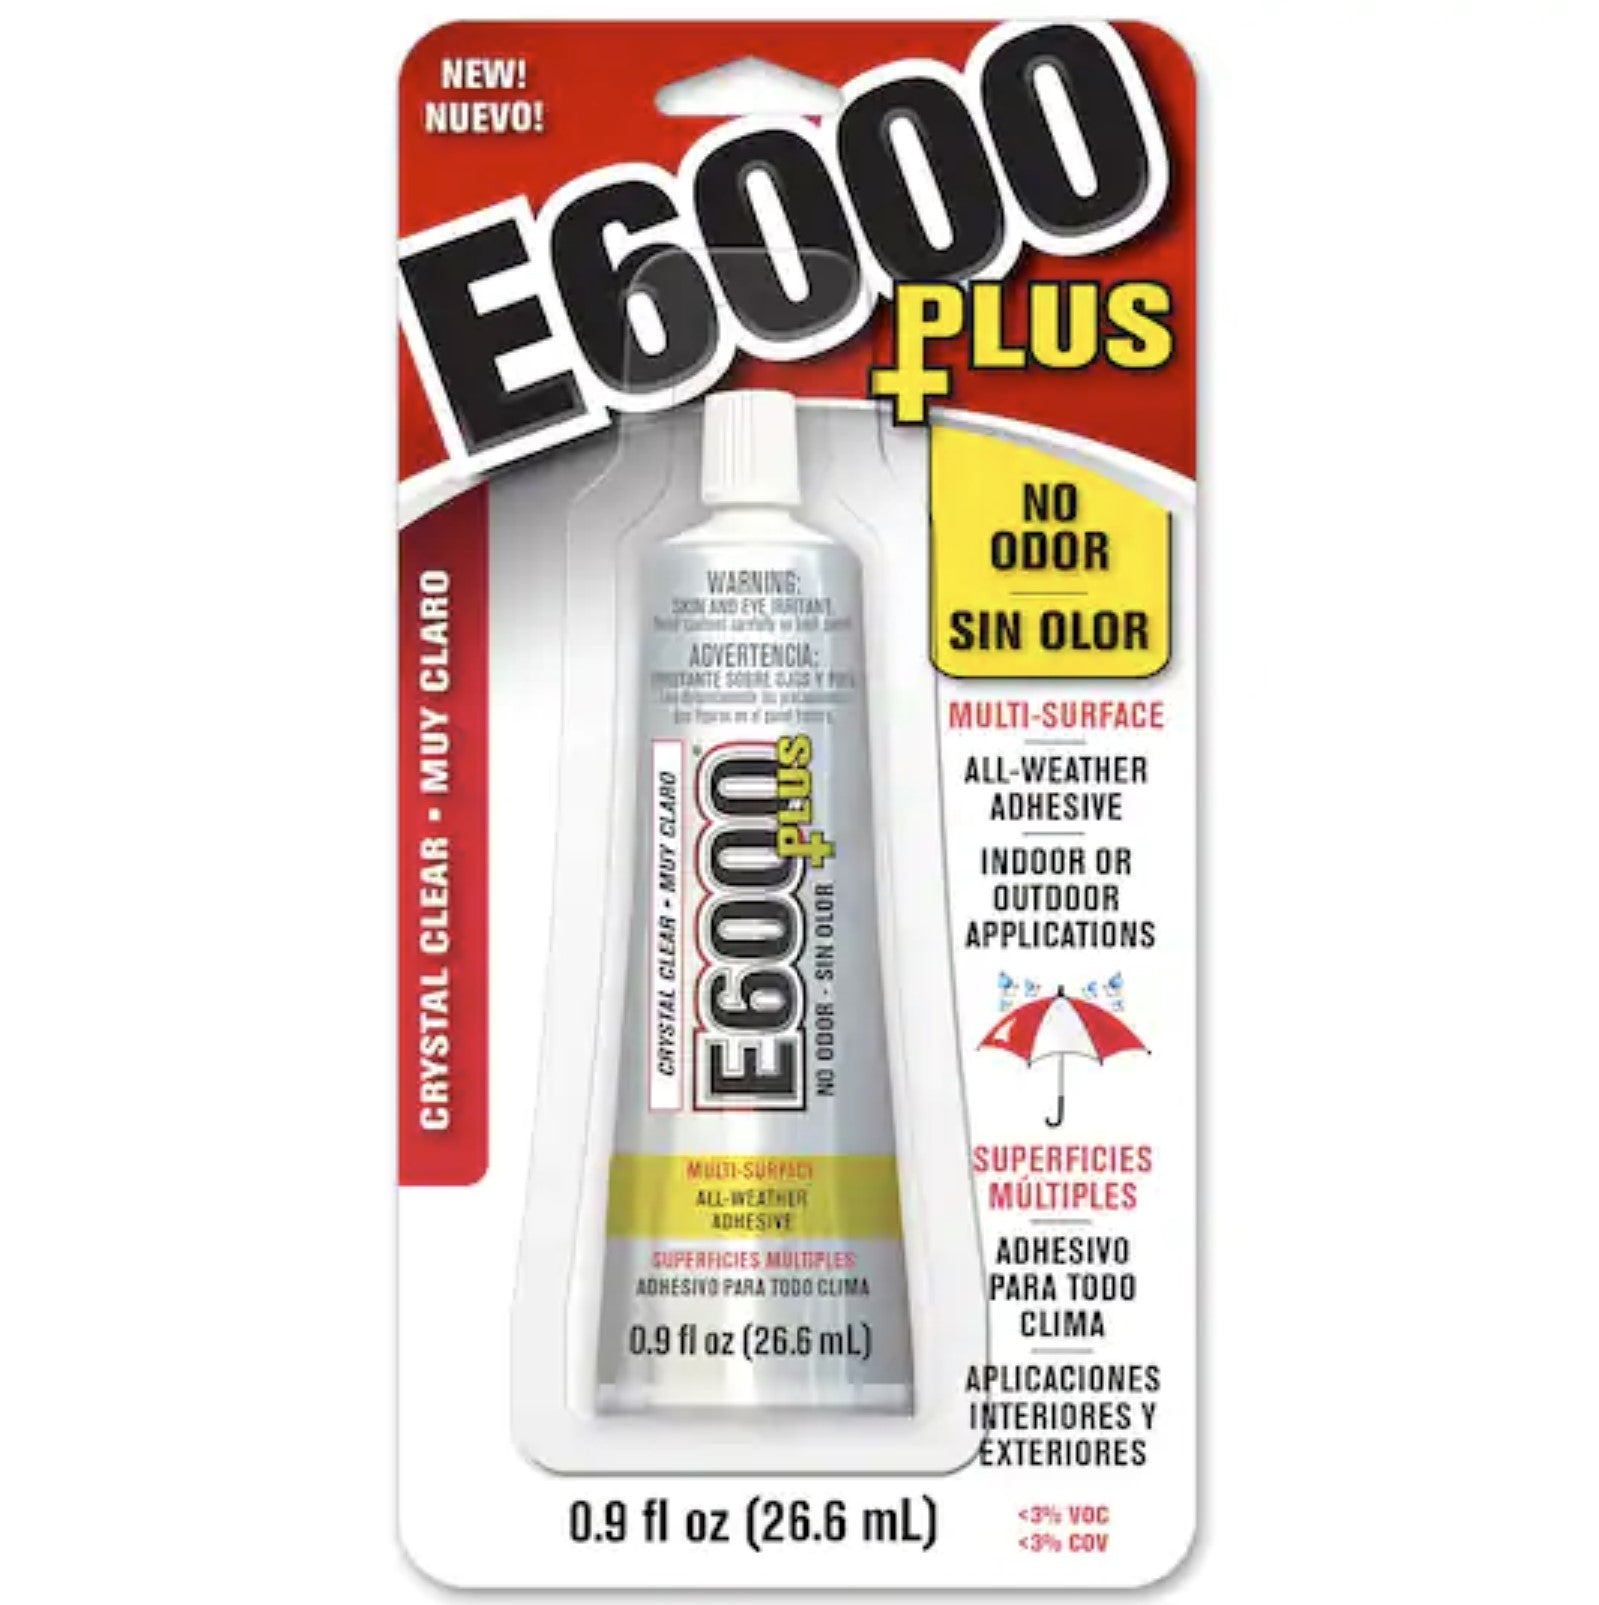 E6000® Plus Crystal Clear All-Weather Adhesive (0.9 fl oz)